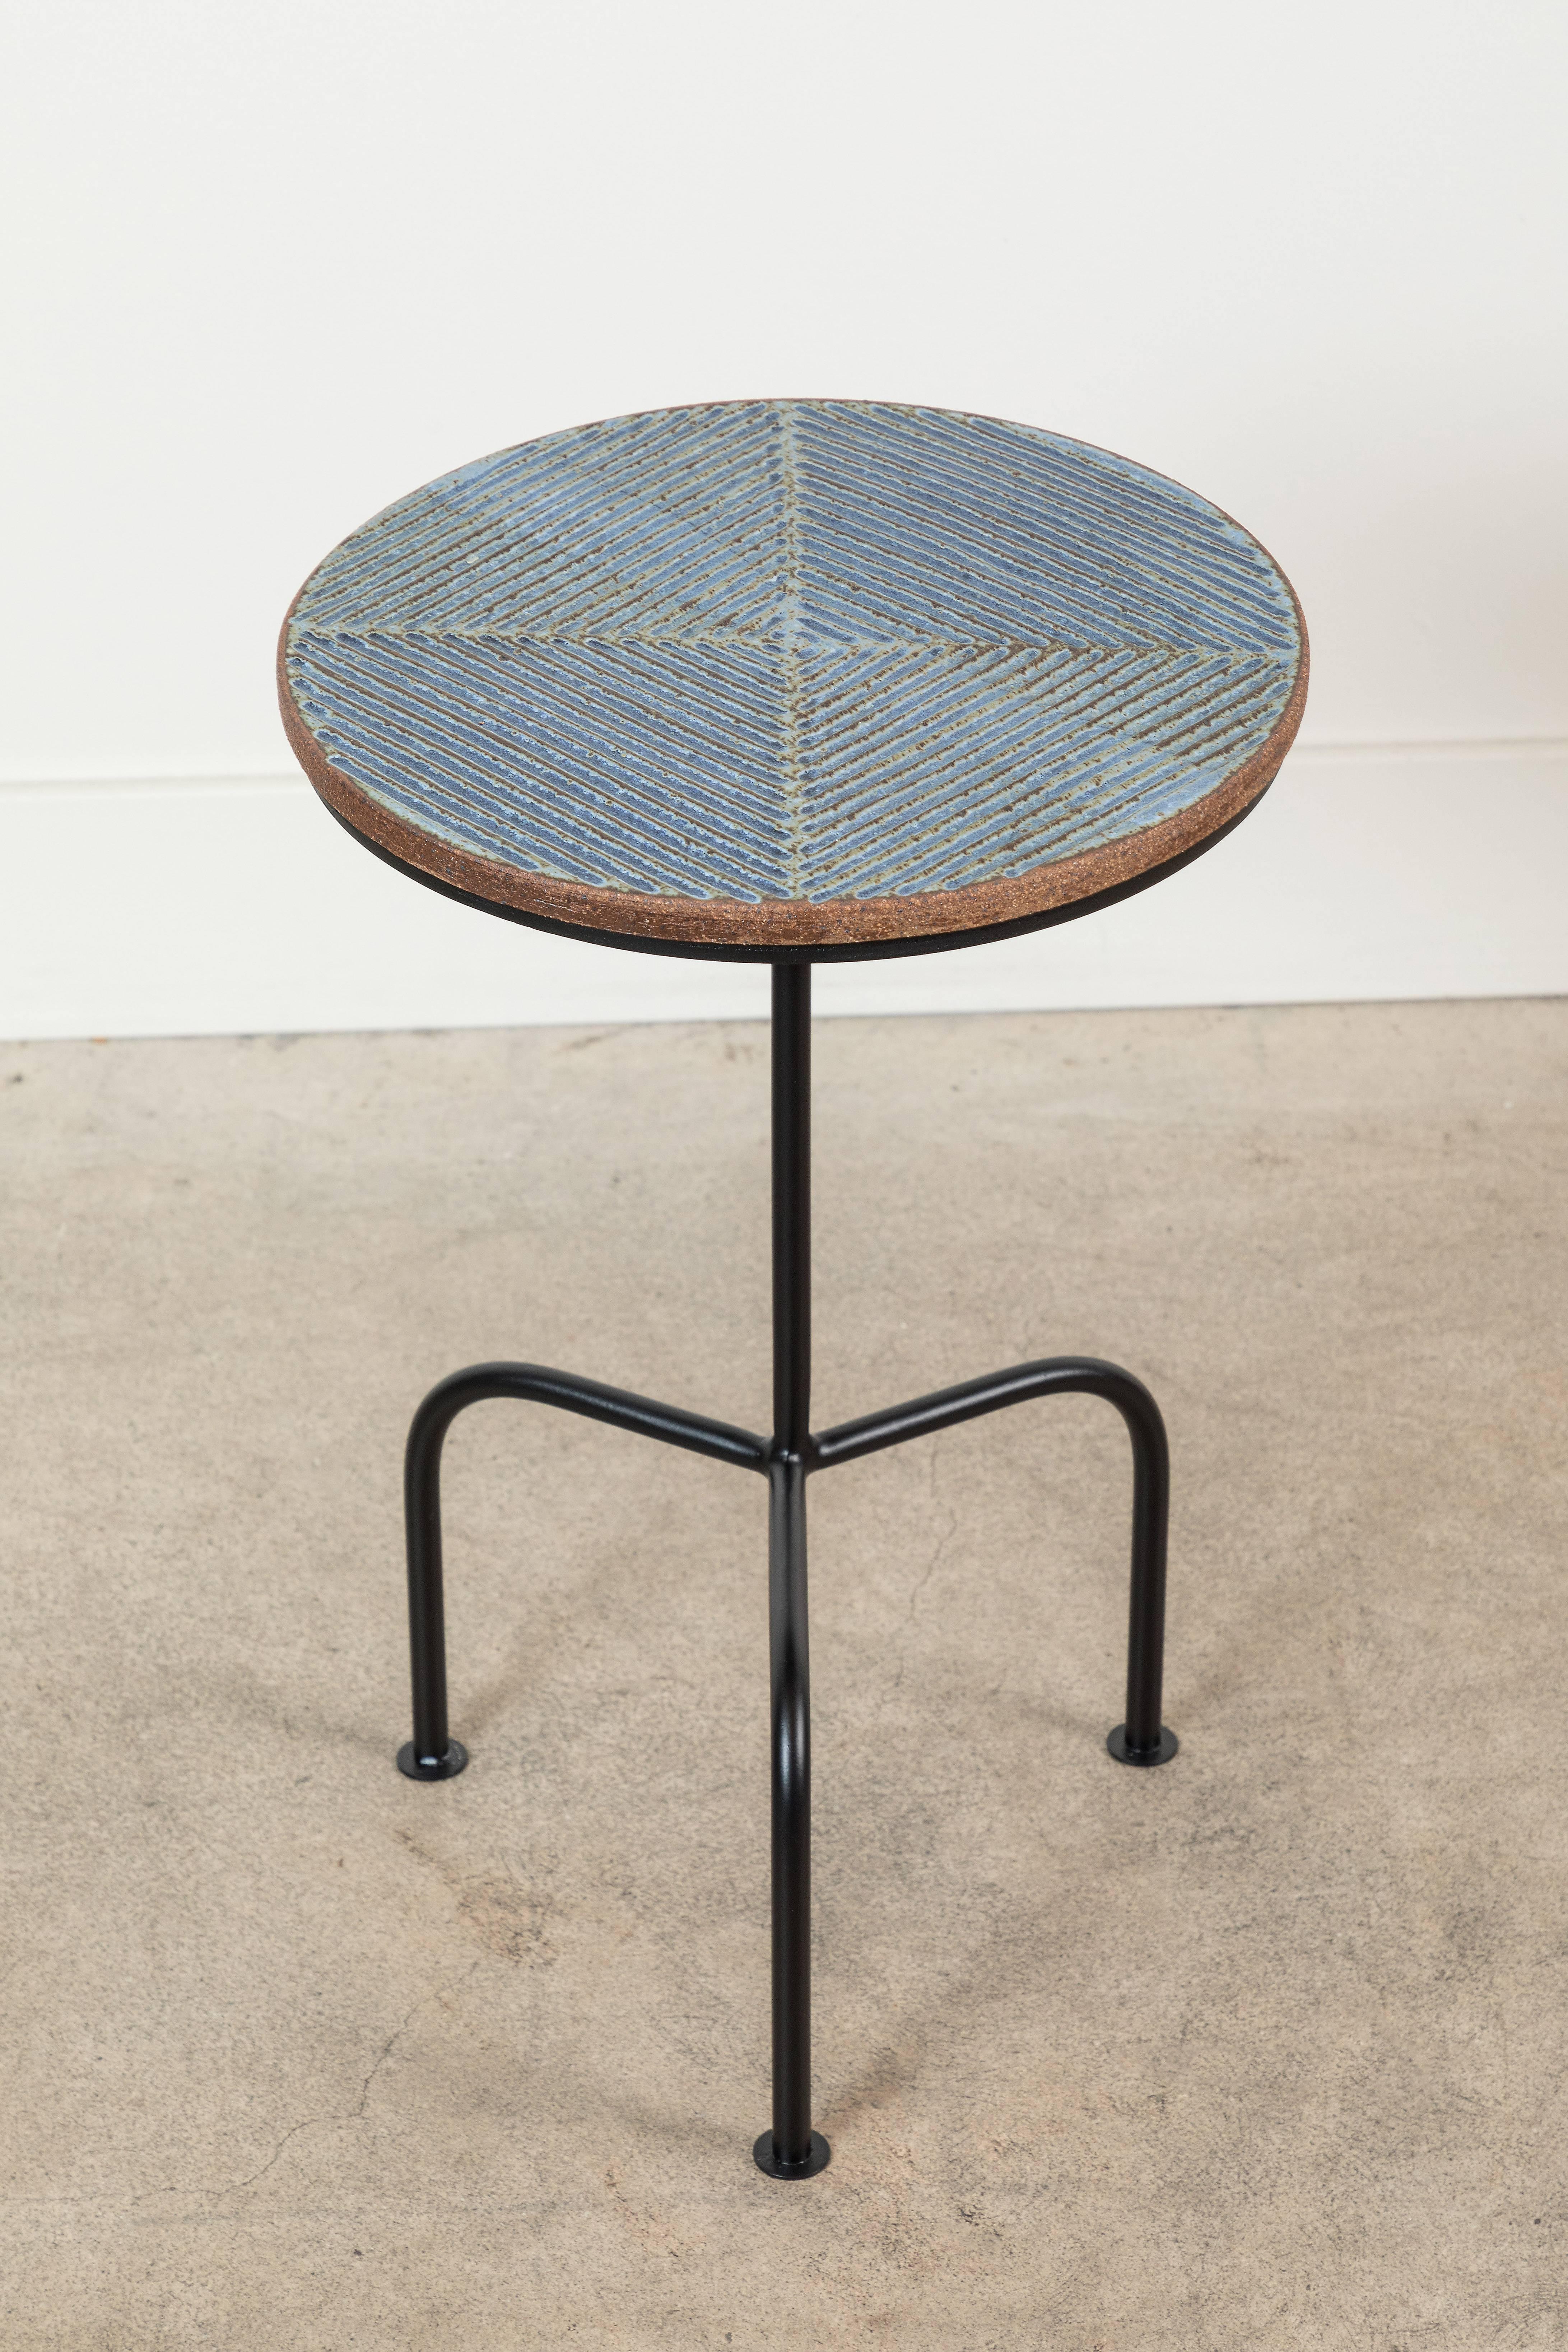 Mid-Century Modern Steel and Ceramic Side Table by Mt. Washington Pottery for Lawson-Fenning